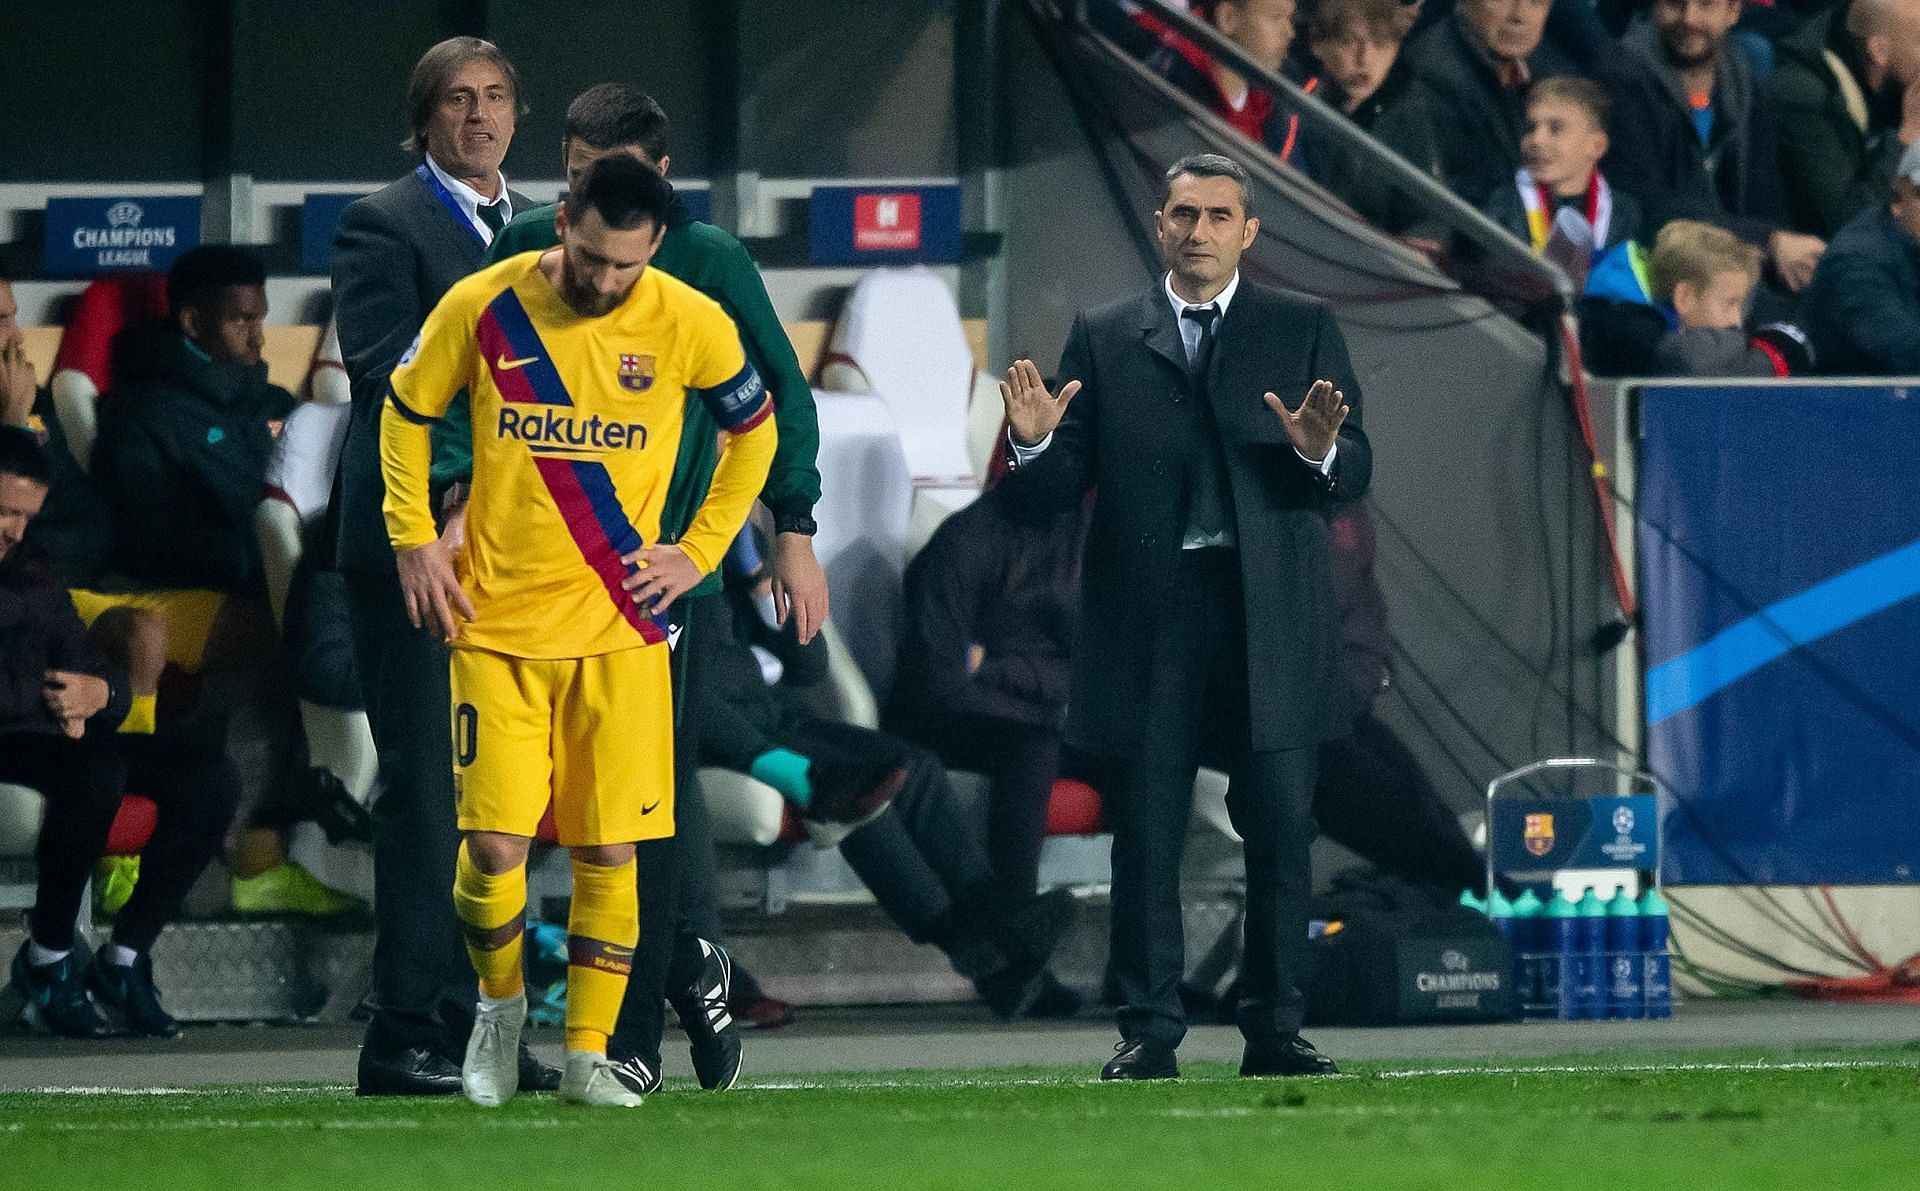 Ernesto Valverde managed Lionel Messi (in yellow) for over 100 games.